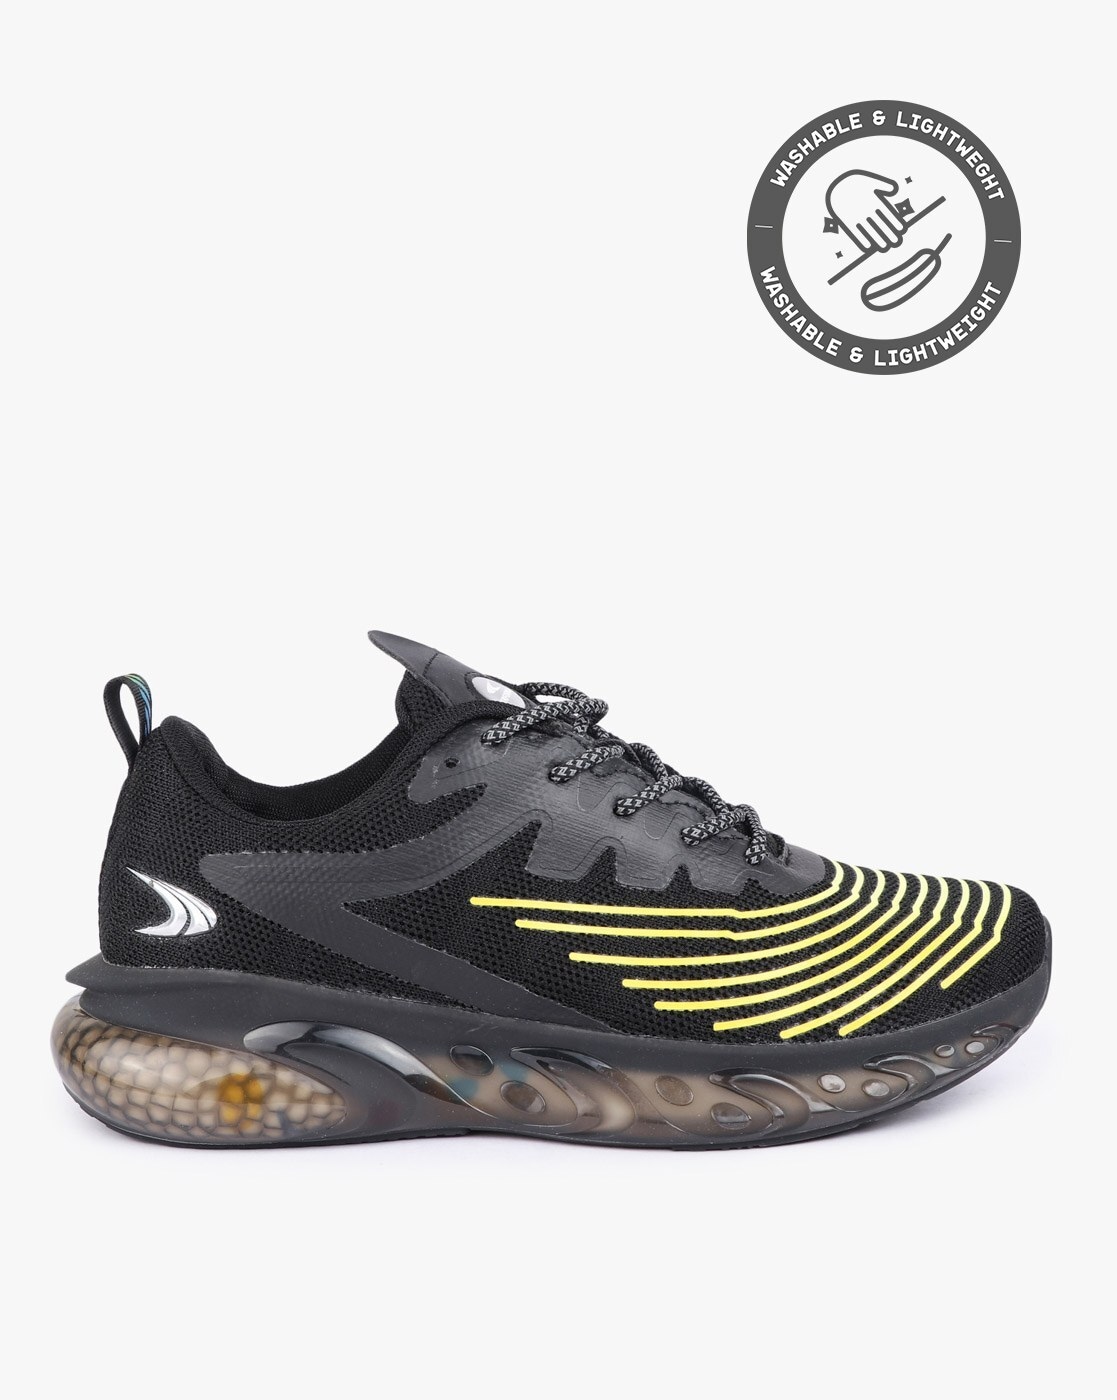 रनिंग शूज - Buy Running Shoes Online at Lowest Price in India | Myntra